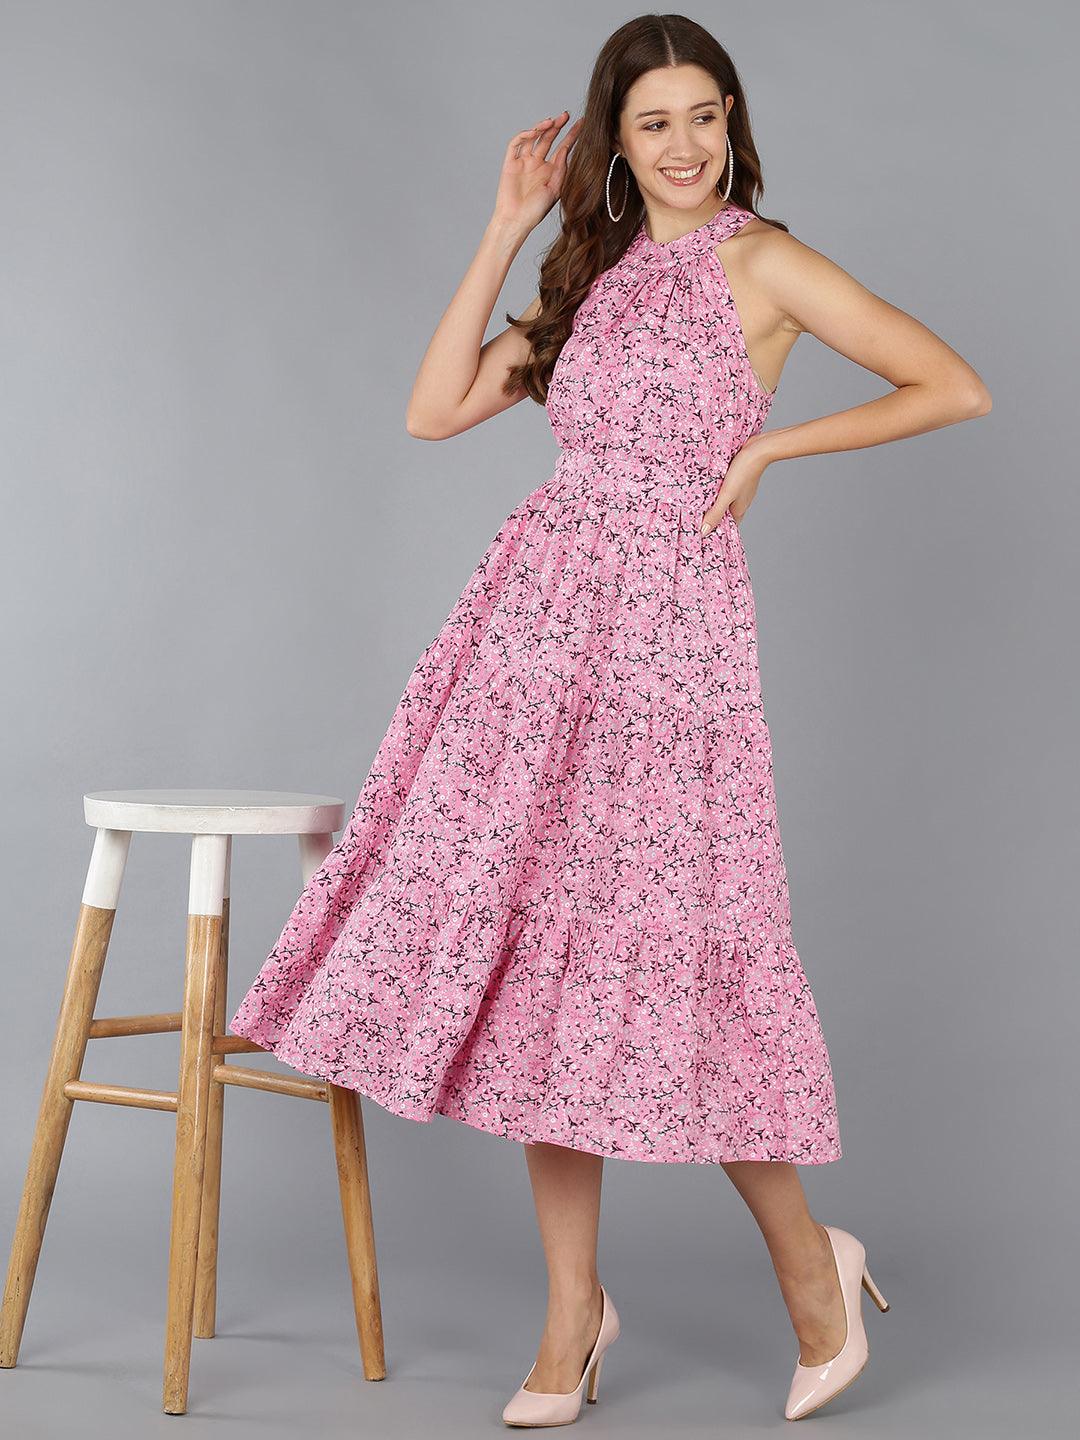 Floral Printed Pink Tiered Dress - Znxclothing